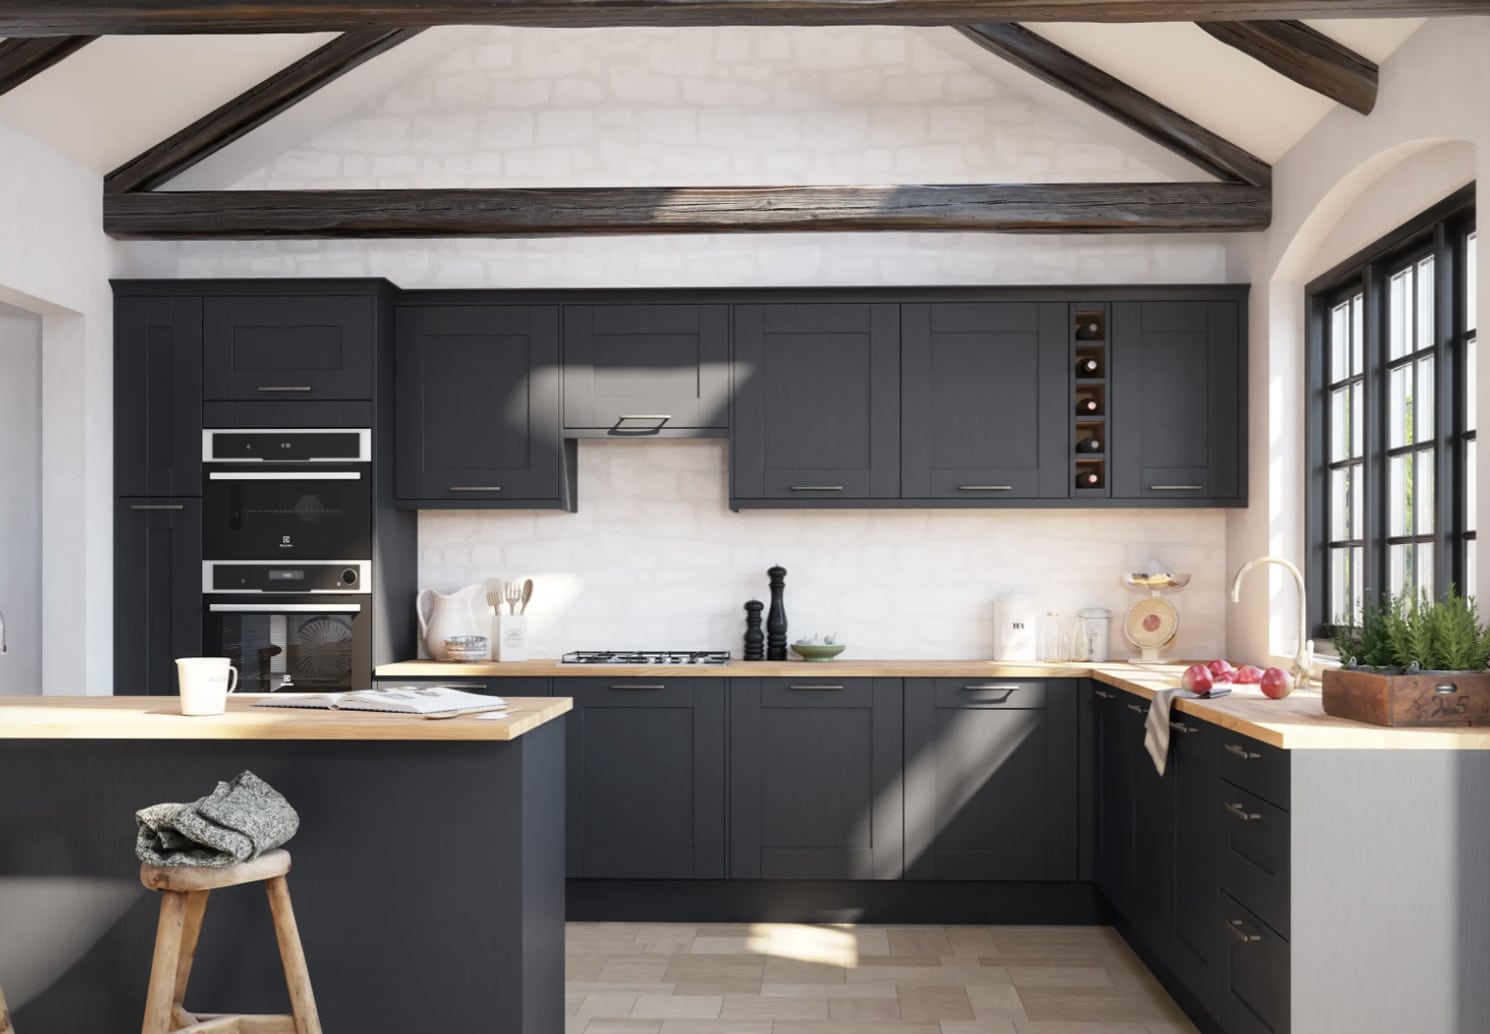 The Winchester kitchen by Magnet in a sophisticated dark shade.